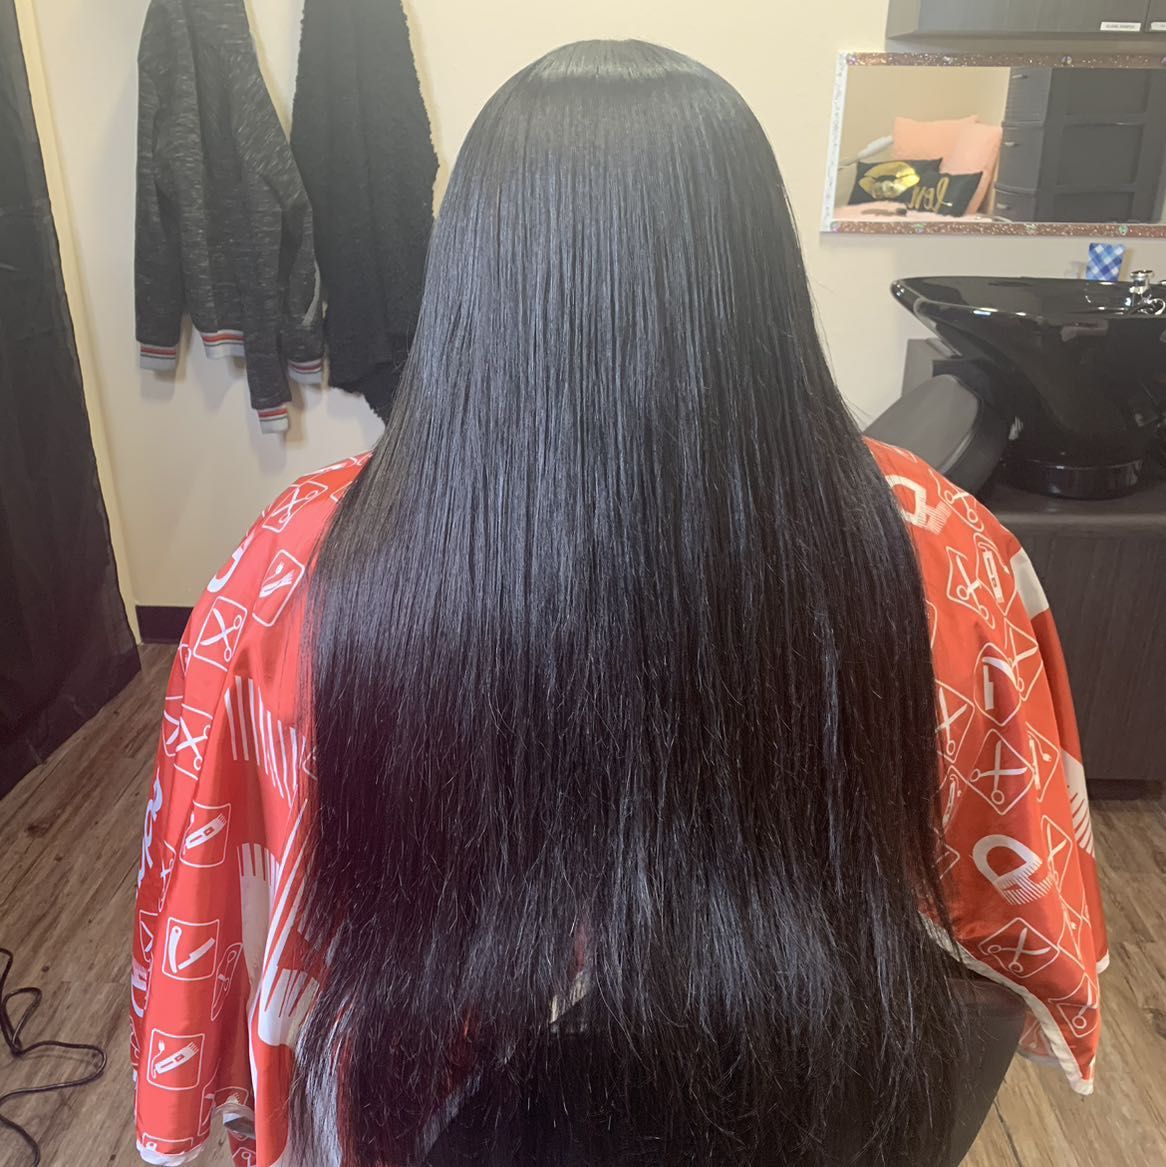 Traditional Sew-in Extensions portfolio